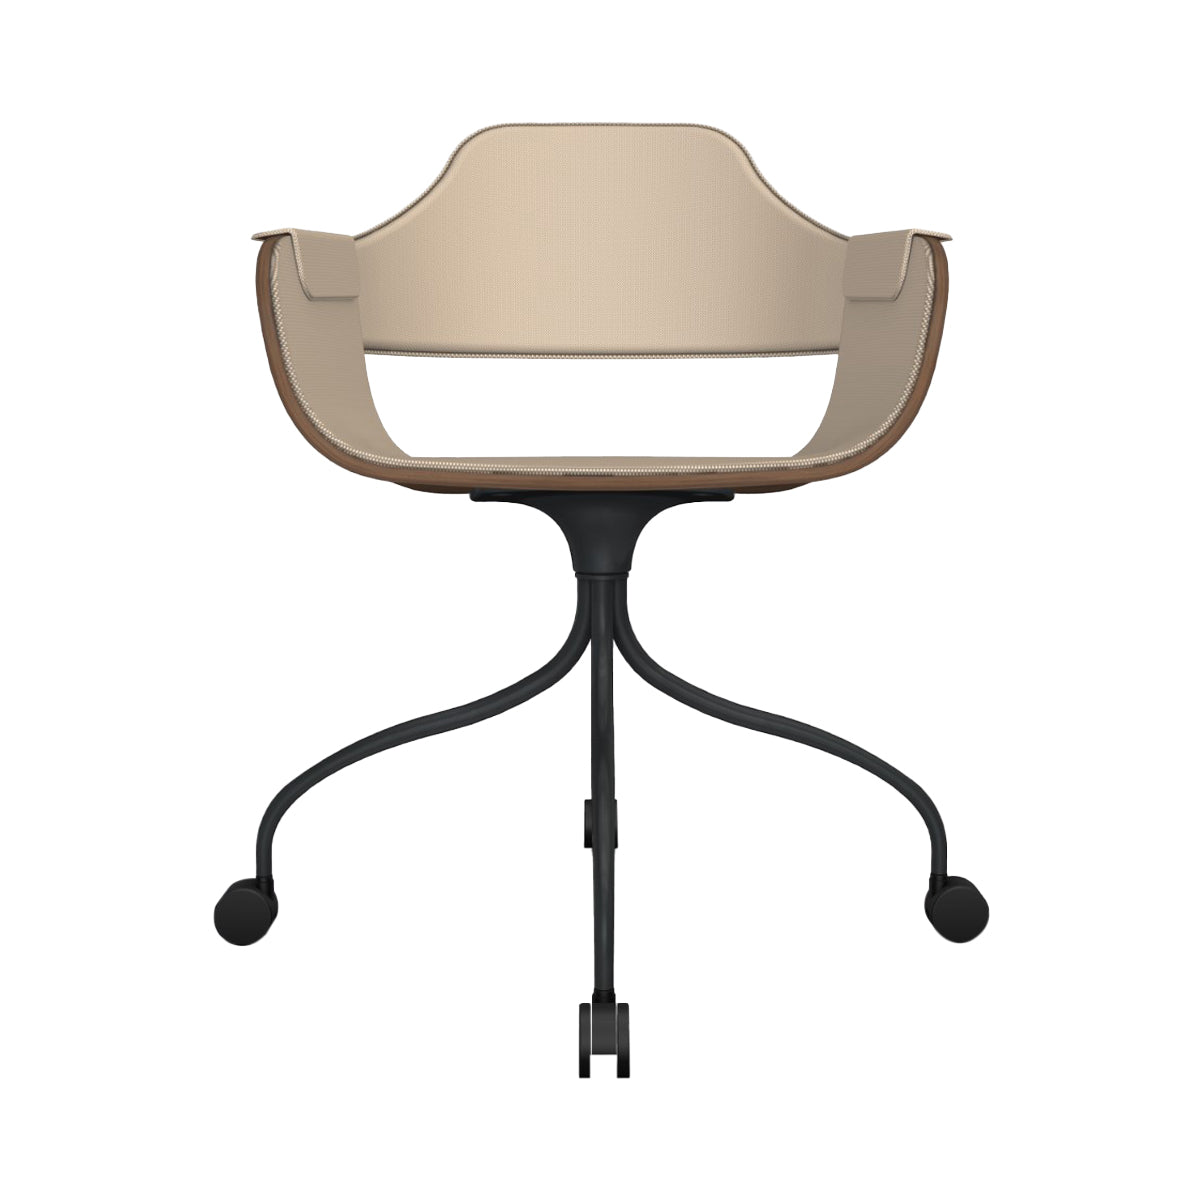 Showtime Chair with Wheel: Full Upholstered + Anthracite Grey